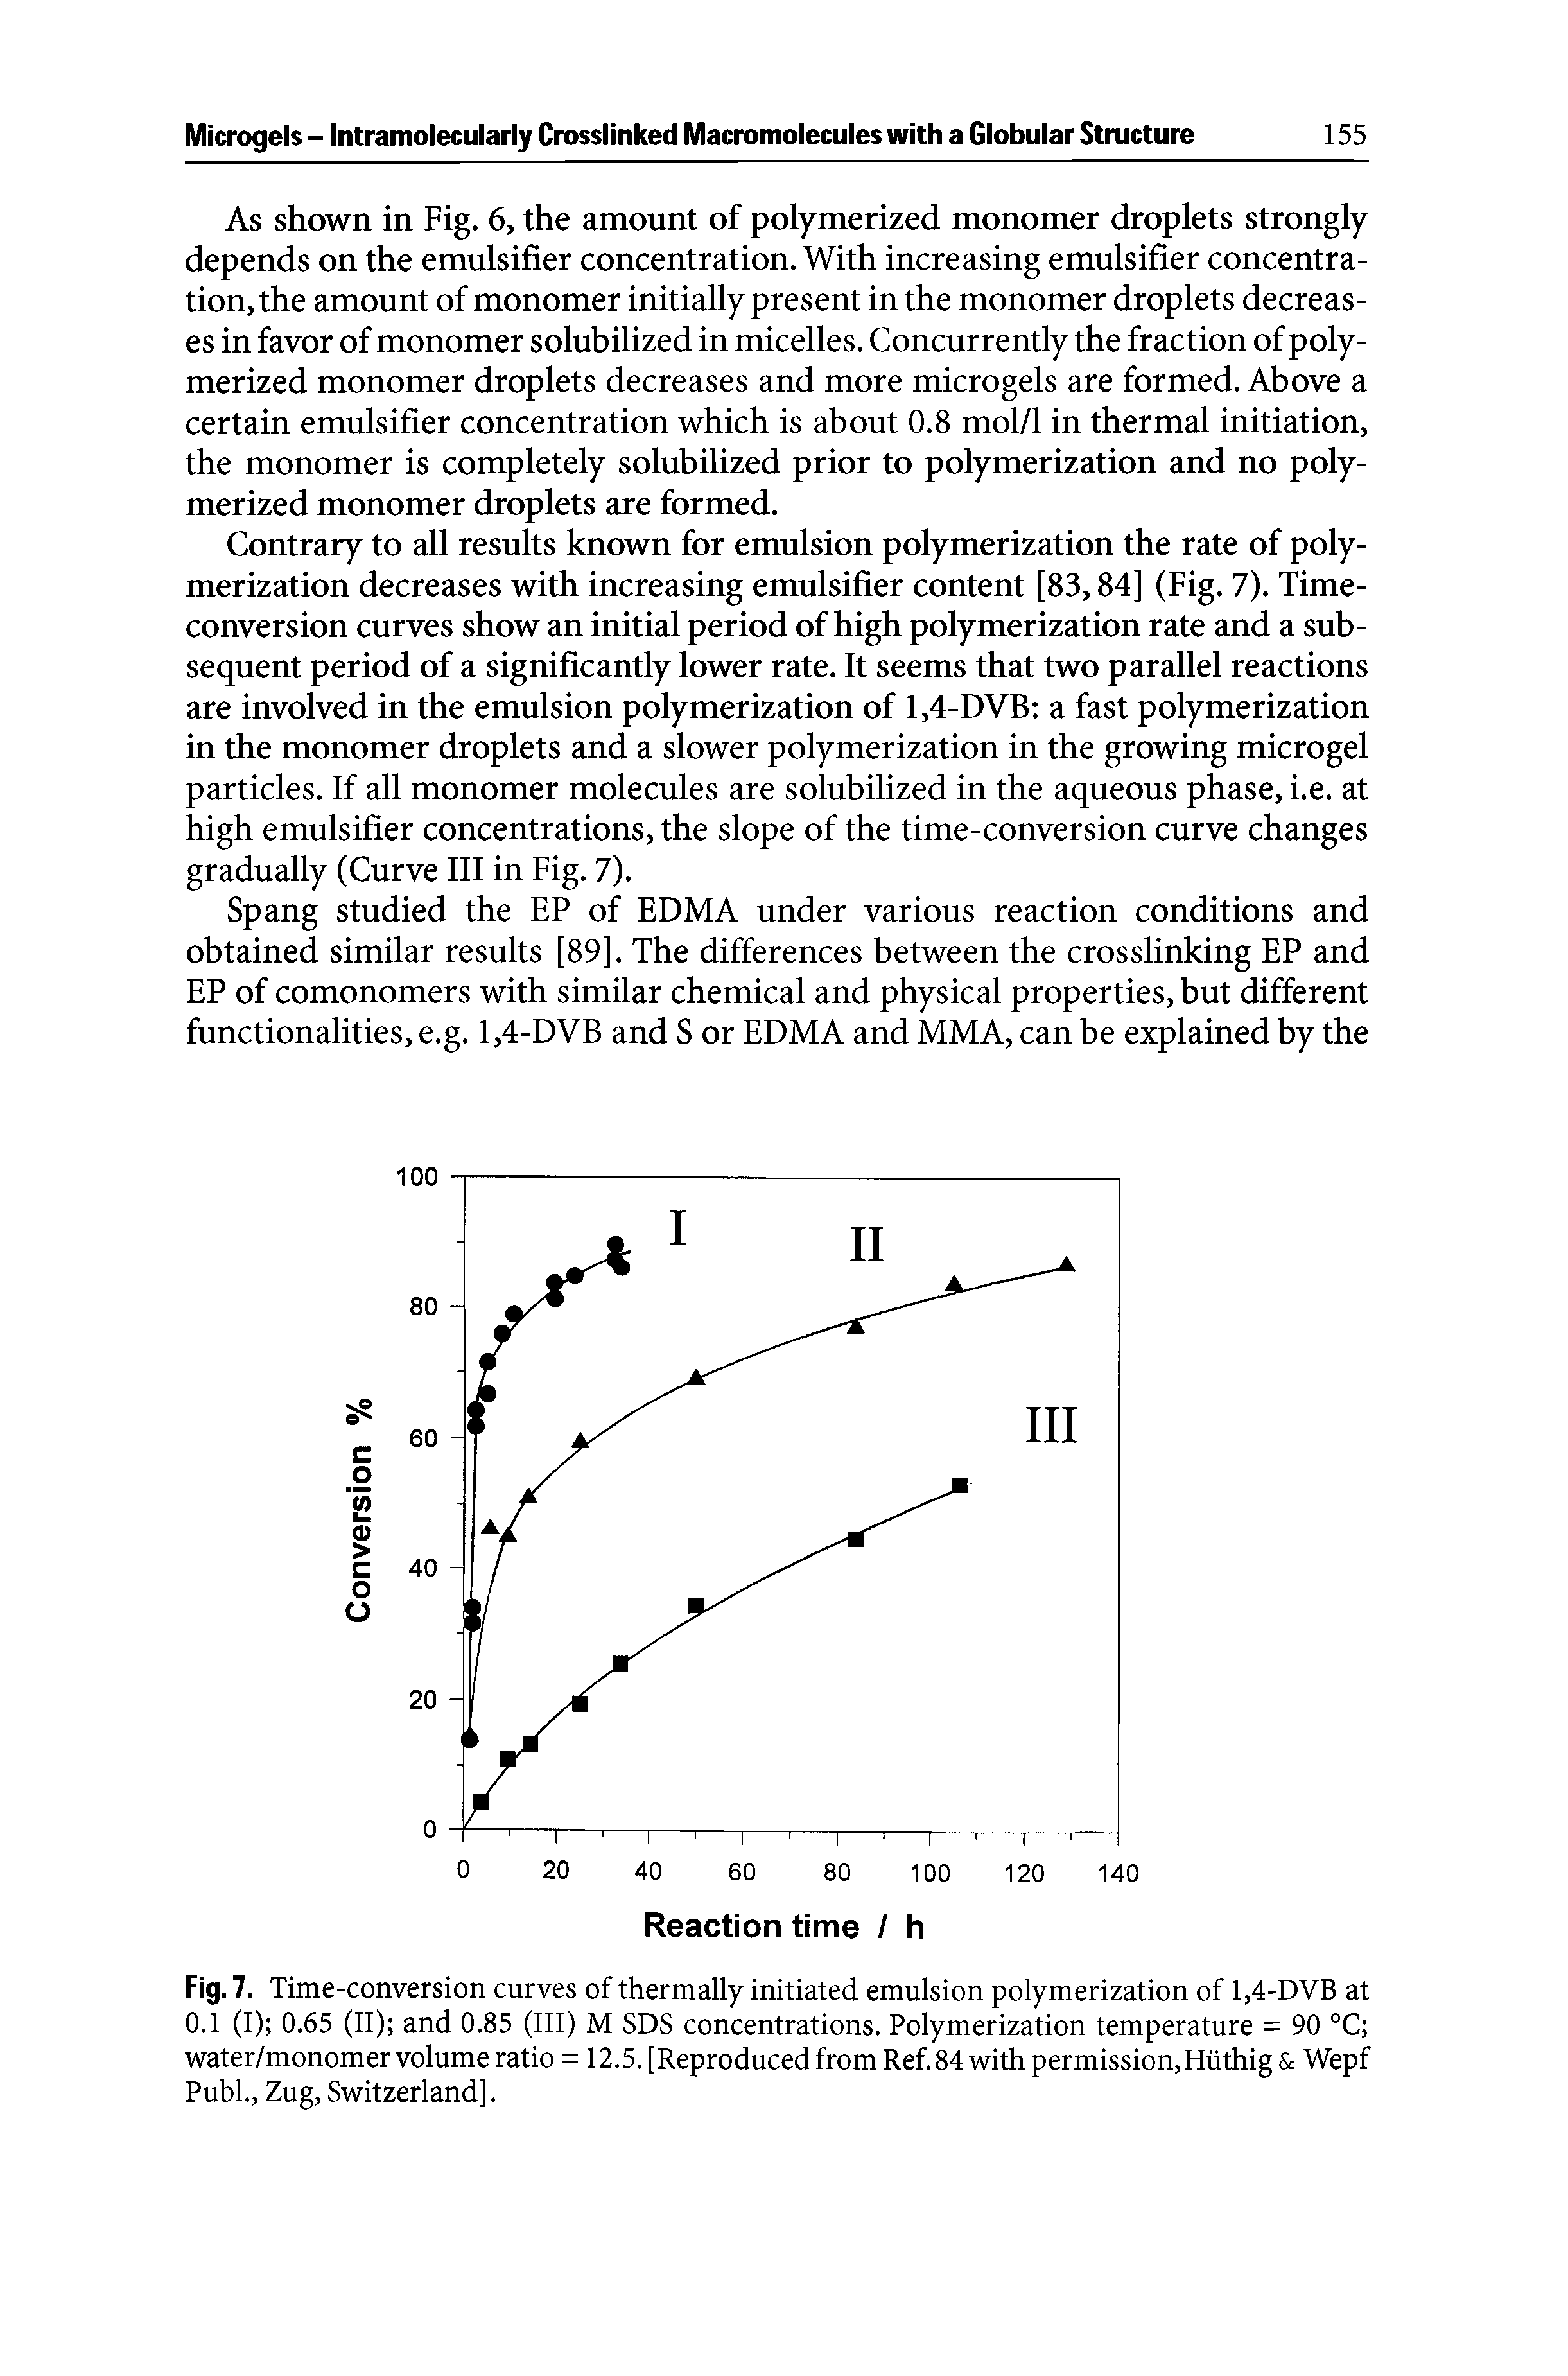 Fig. 7. Time-conversion curves of thermally initiated emulsion polymerization of 1,4-DVB at 0.1 (I) 0.65 (II) and 0.85 (III) M SDS concentrations. Polymerization temperature = 90 °C water/monomer volume ratio = 12.5. [Reproduced from Ref.84 with permission,Hiithig Wepf Publ., Zug, Switzerland].